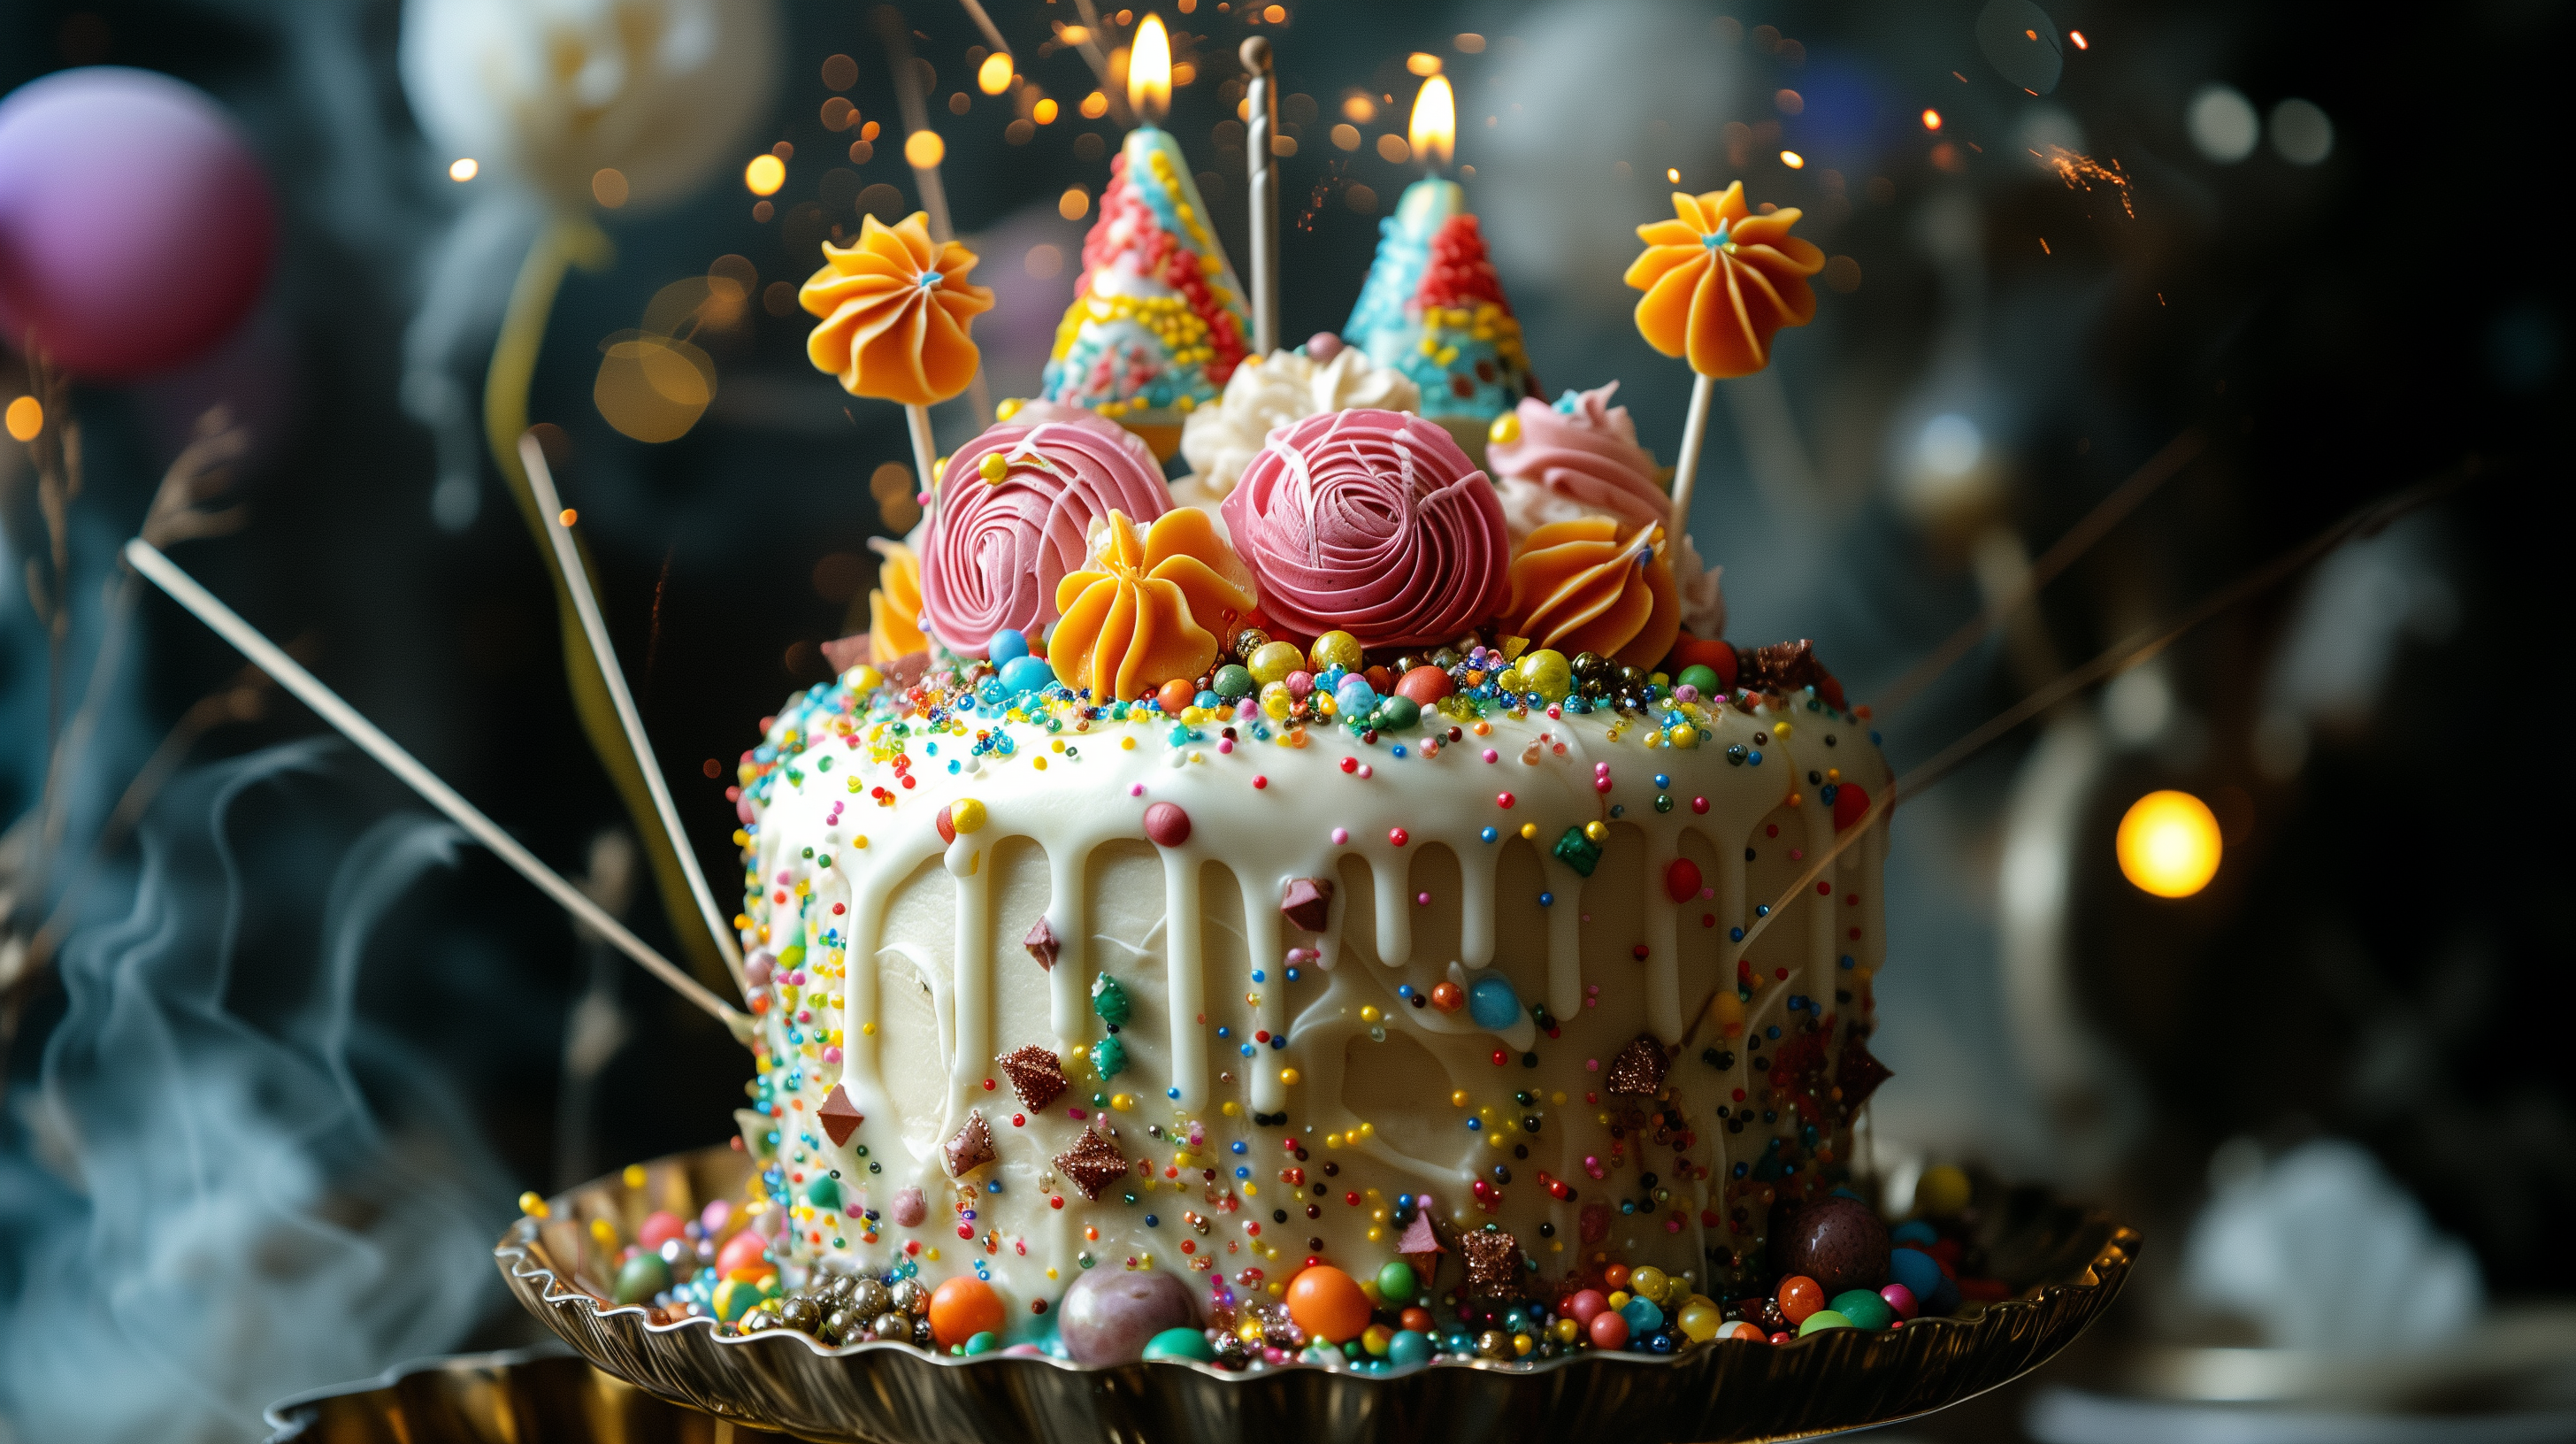 HD wallpaper of a vibrant birthday cake adorned with colorful sprinkles, icing swirls, and party sparklers creating a festive background.